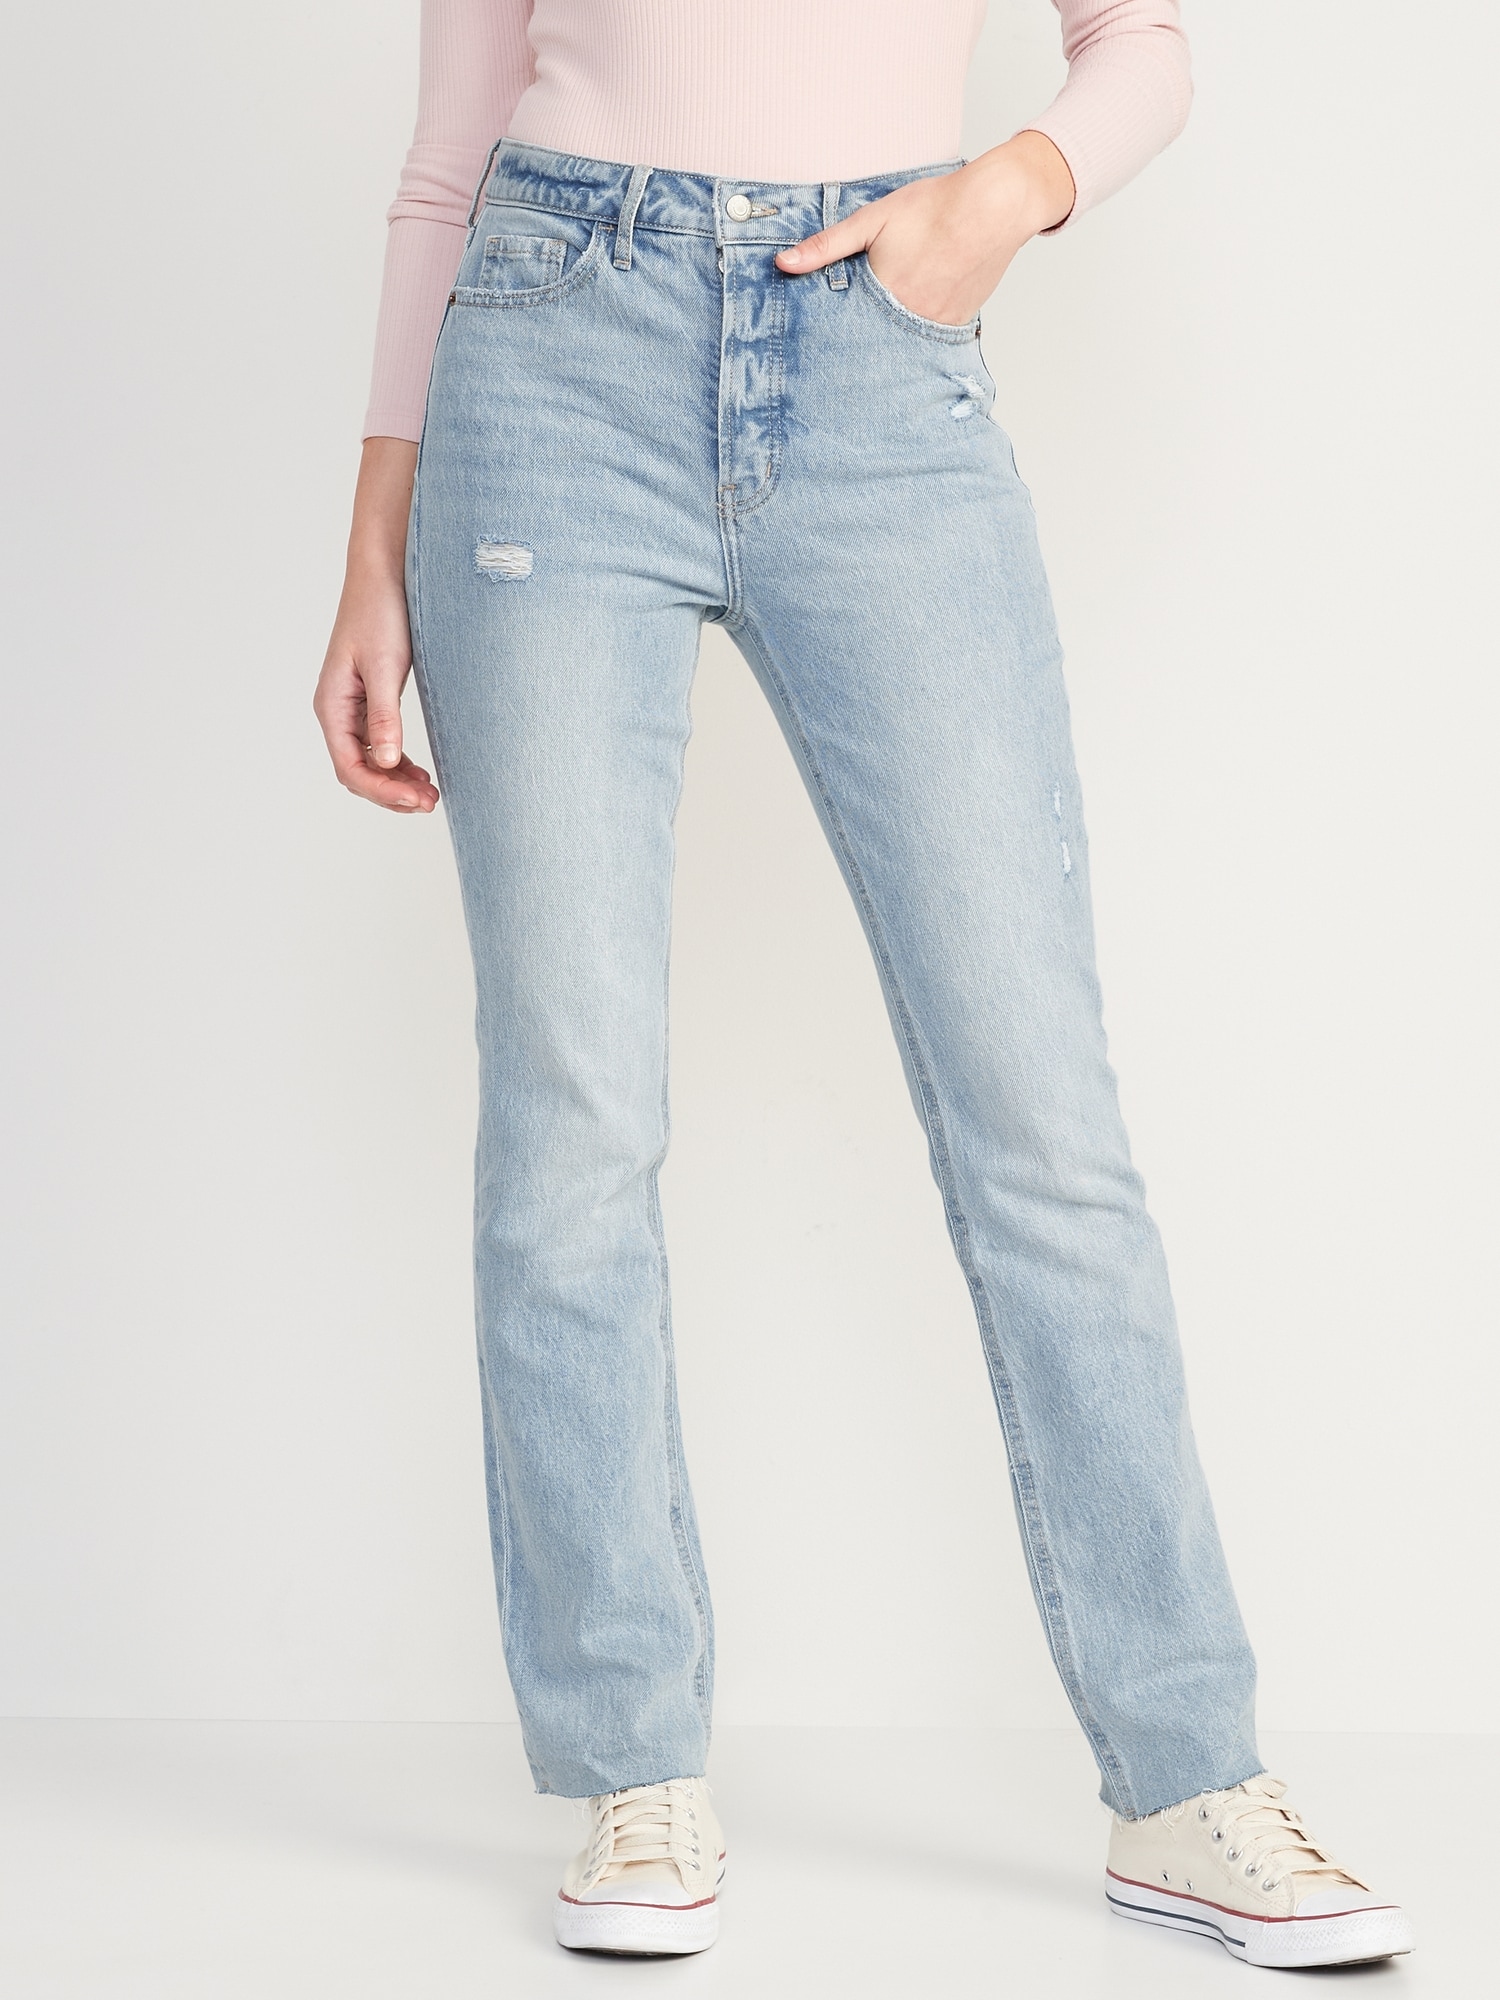 Old Navy Extra High-Waisted Button-Fly Kicker Boot-Cut Cut-Off Jeans for Women blue. 1